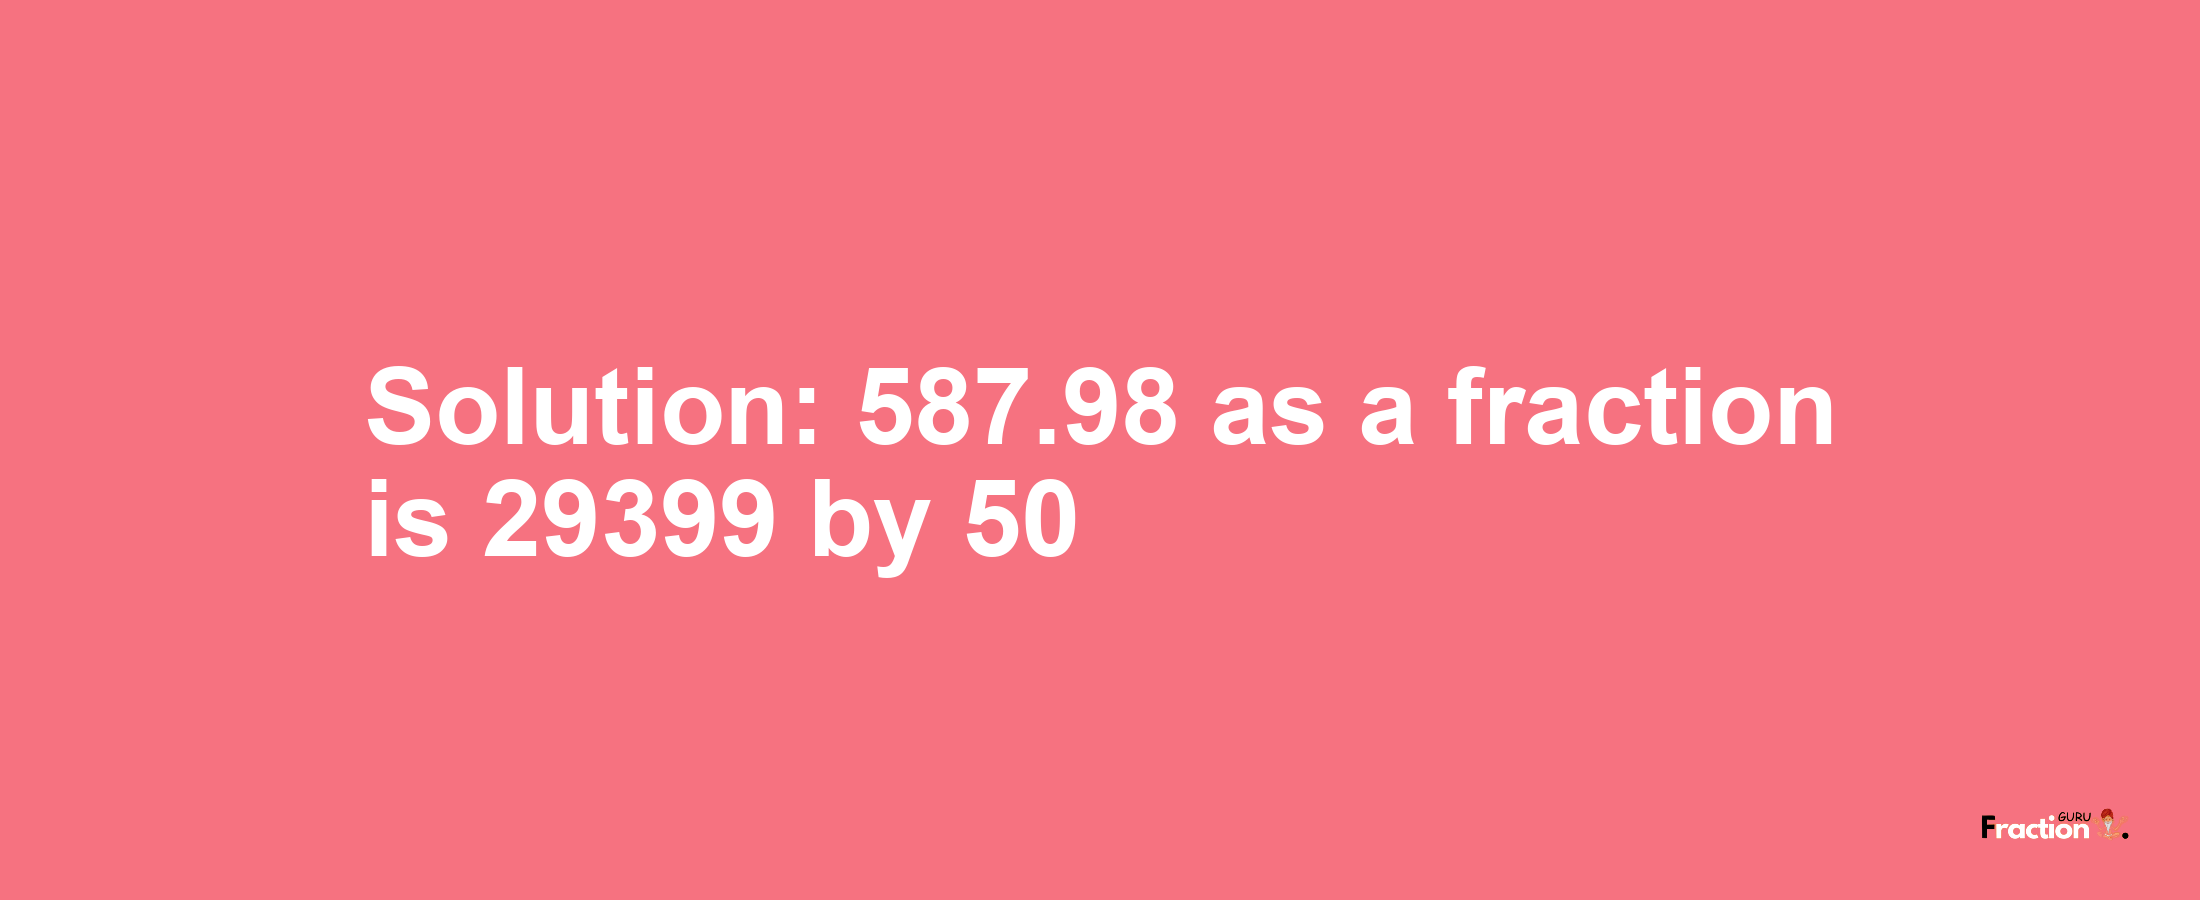 Solution:587.98 as a fraction is 29399/50